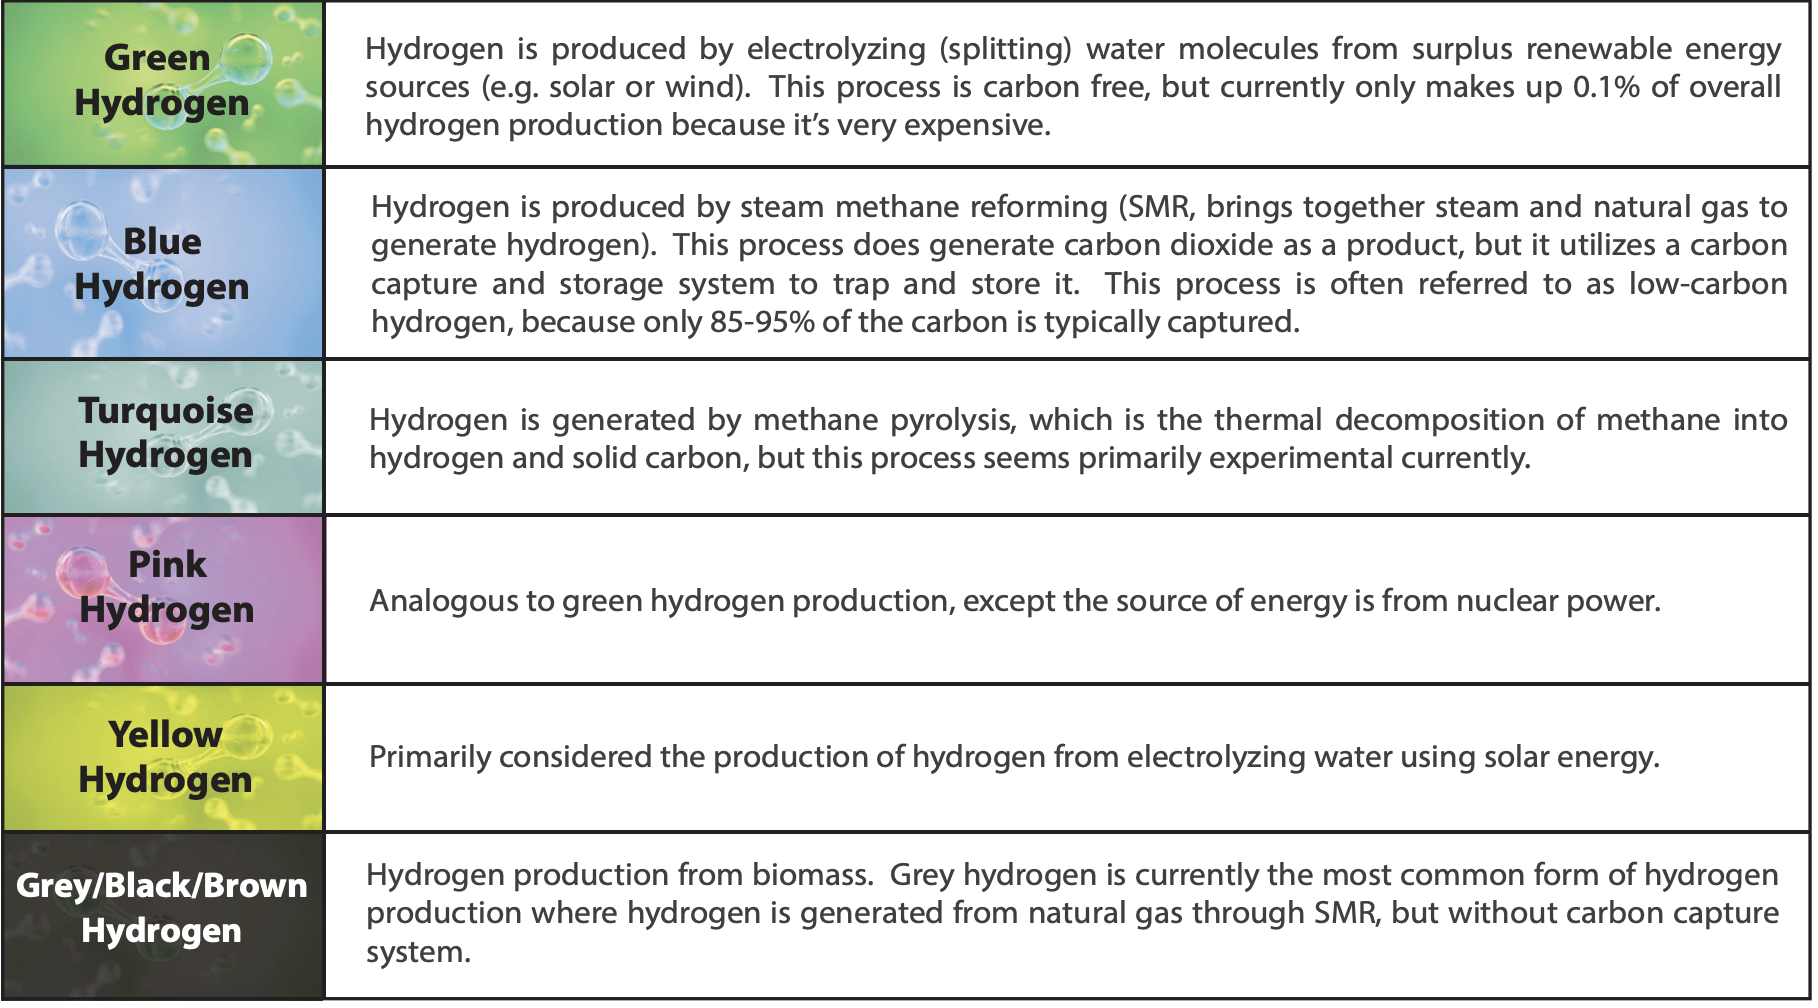 The different types of hydrogen